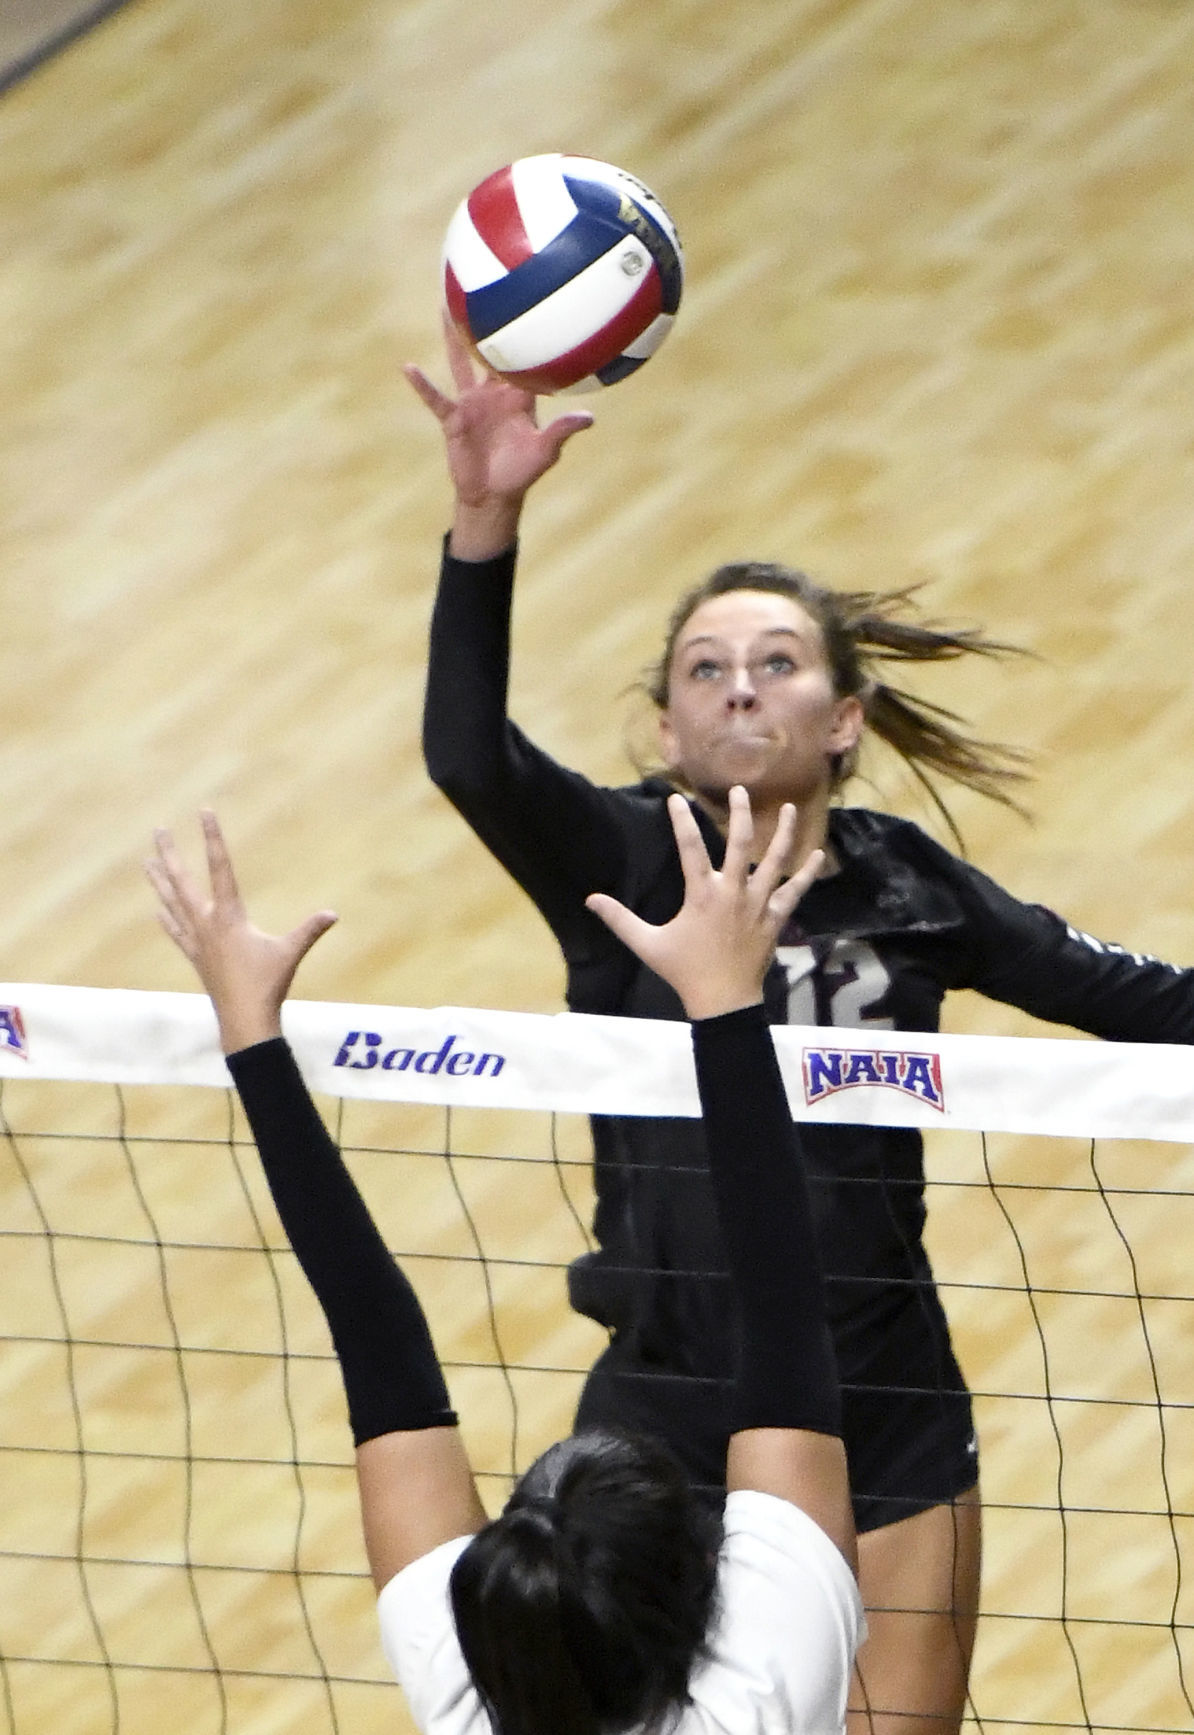 Morningside falls to top-ranked Park in NAIA volleyball opener